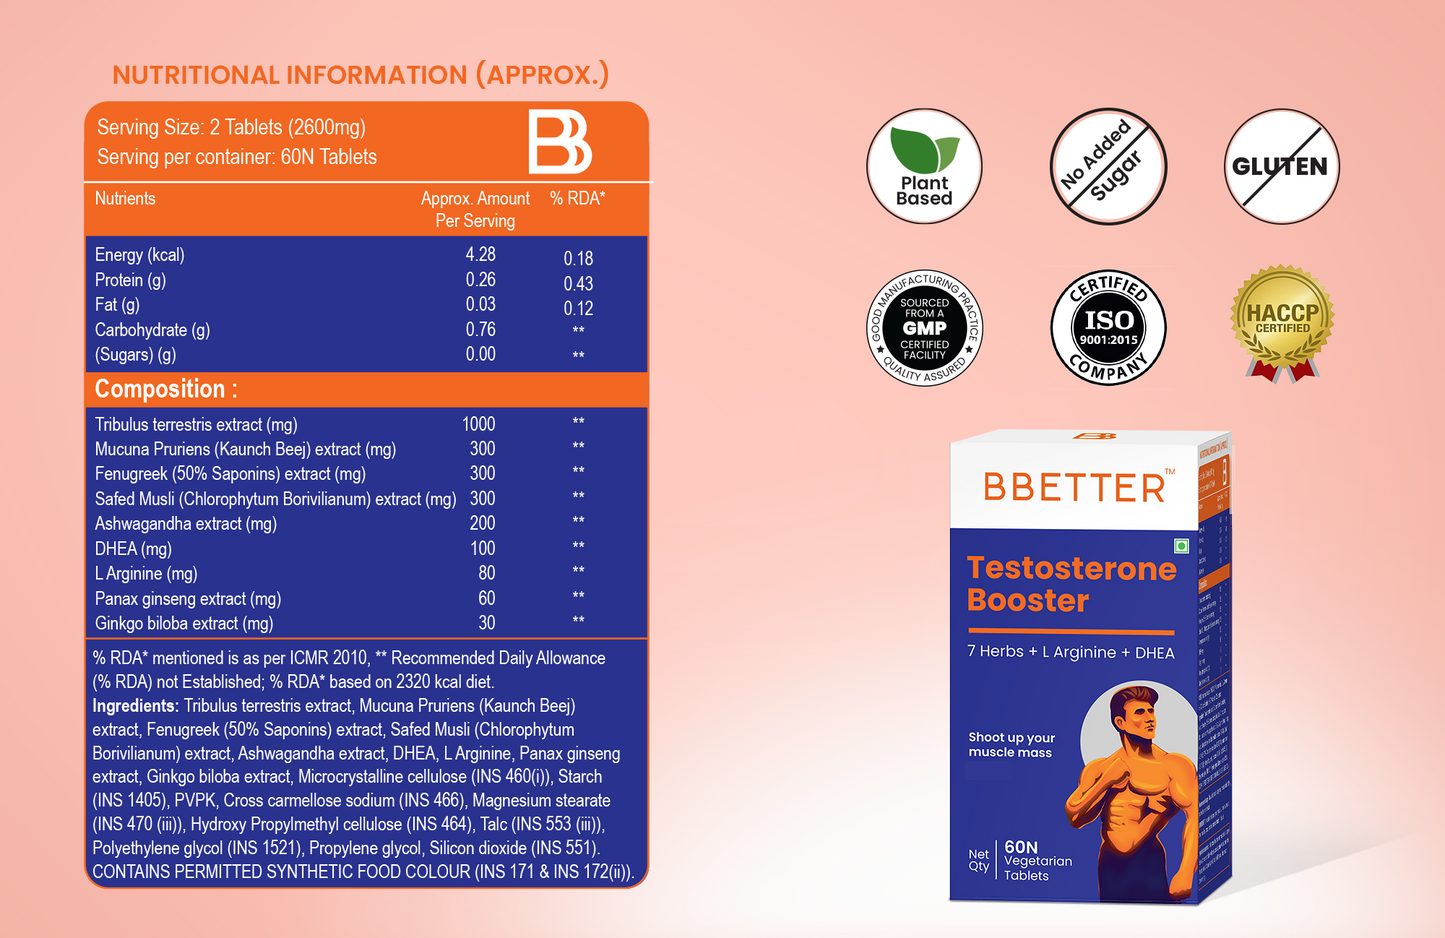 Testosterone Booster for Men